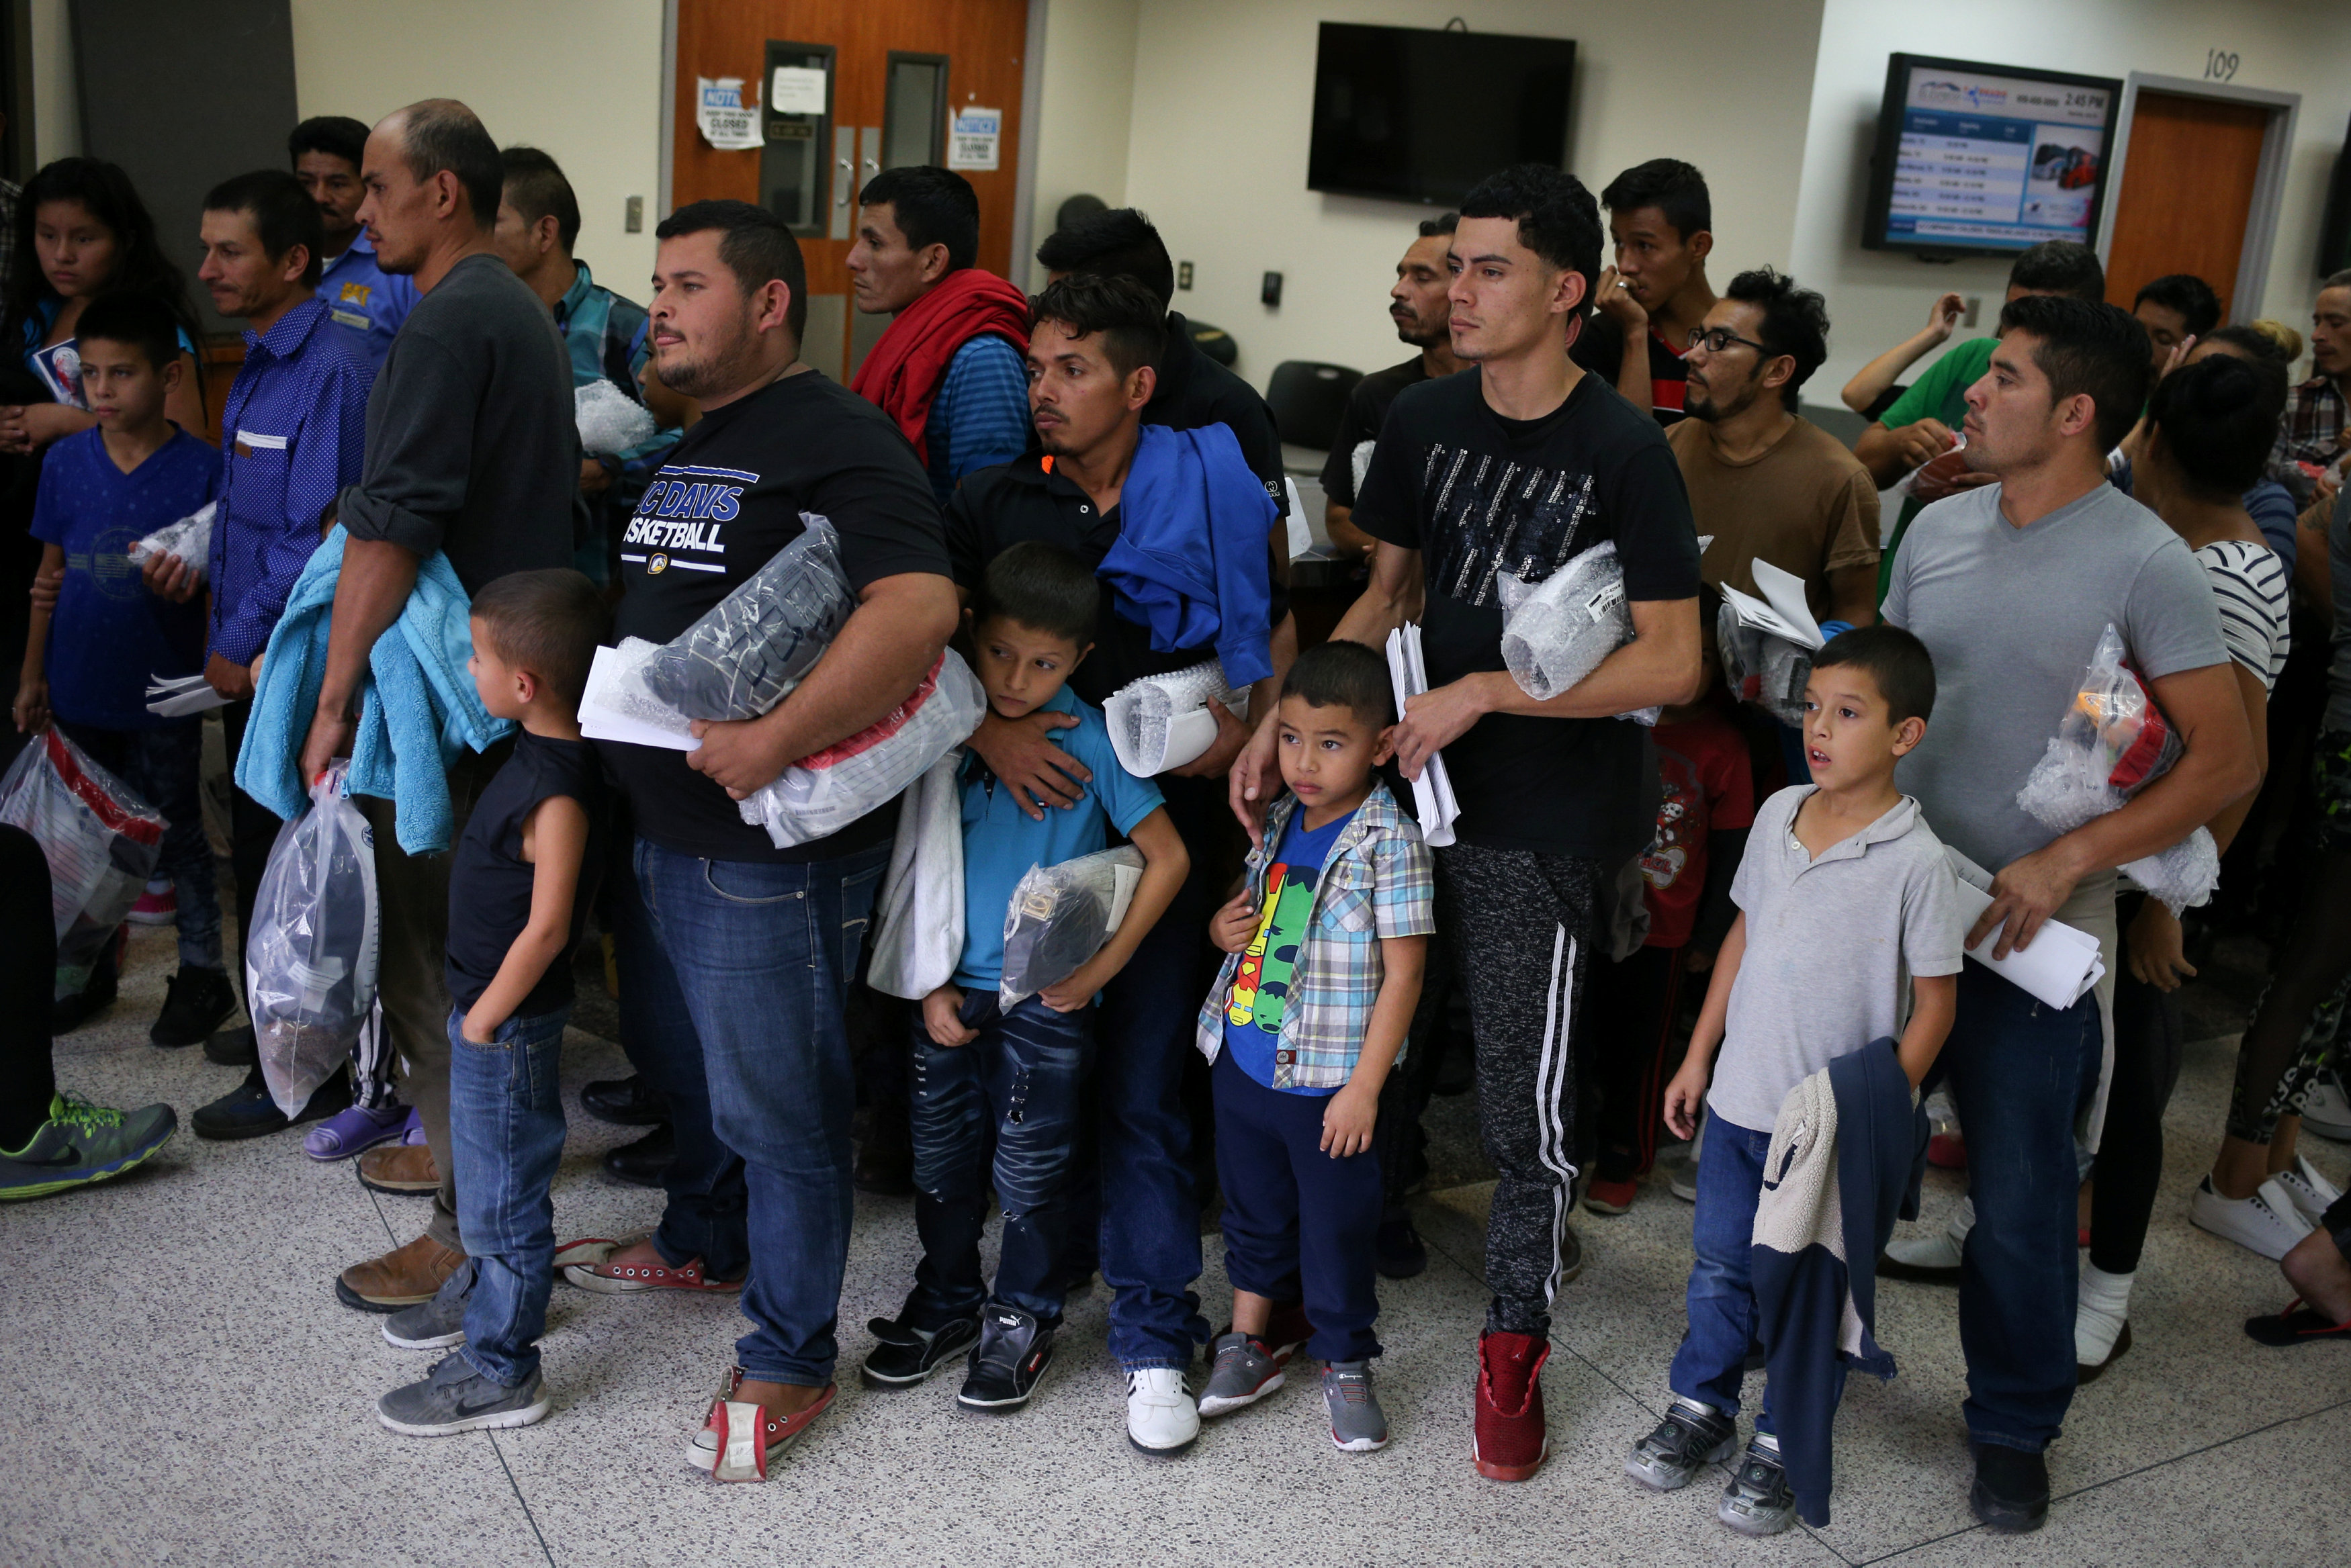 Immigrant families are released from detention July 27 at a bus depot in McAllen, Texas. (CNS/Loren Elliott, Reuters)